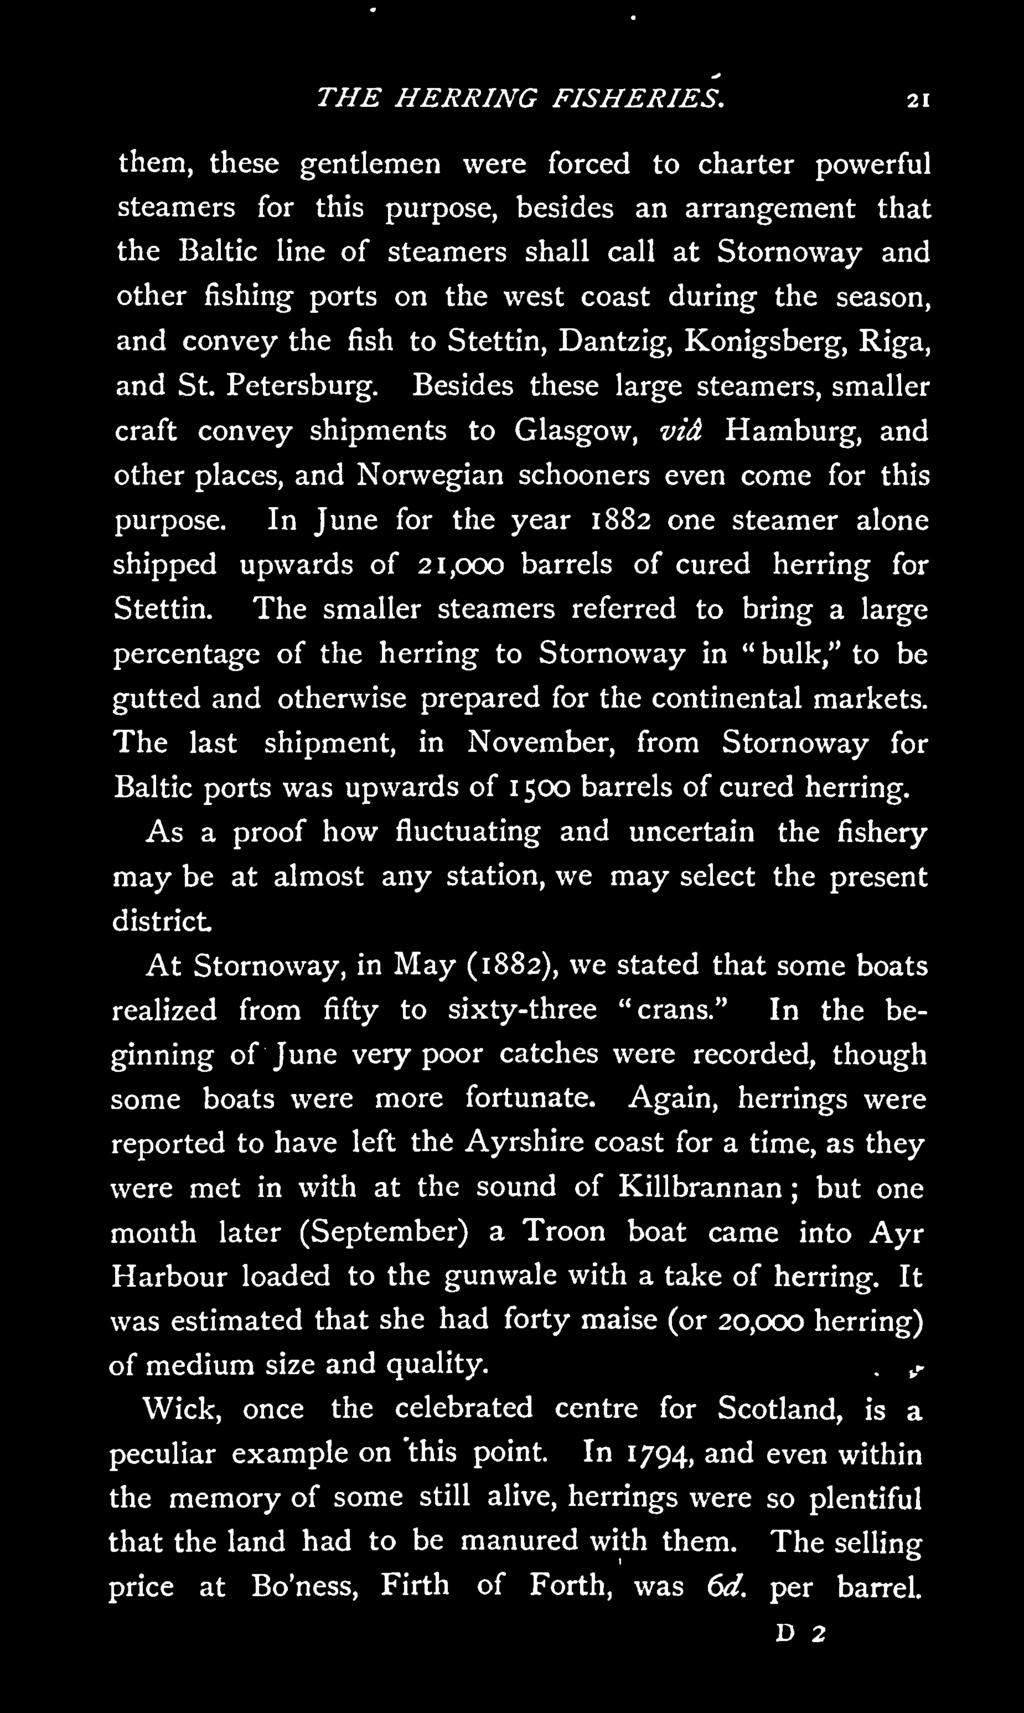 In June for the year 1882 one steamer alone shipped upwards of 21,000 barrels of cured herring for Stettin.